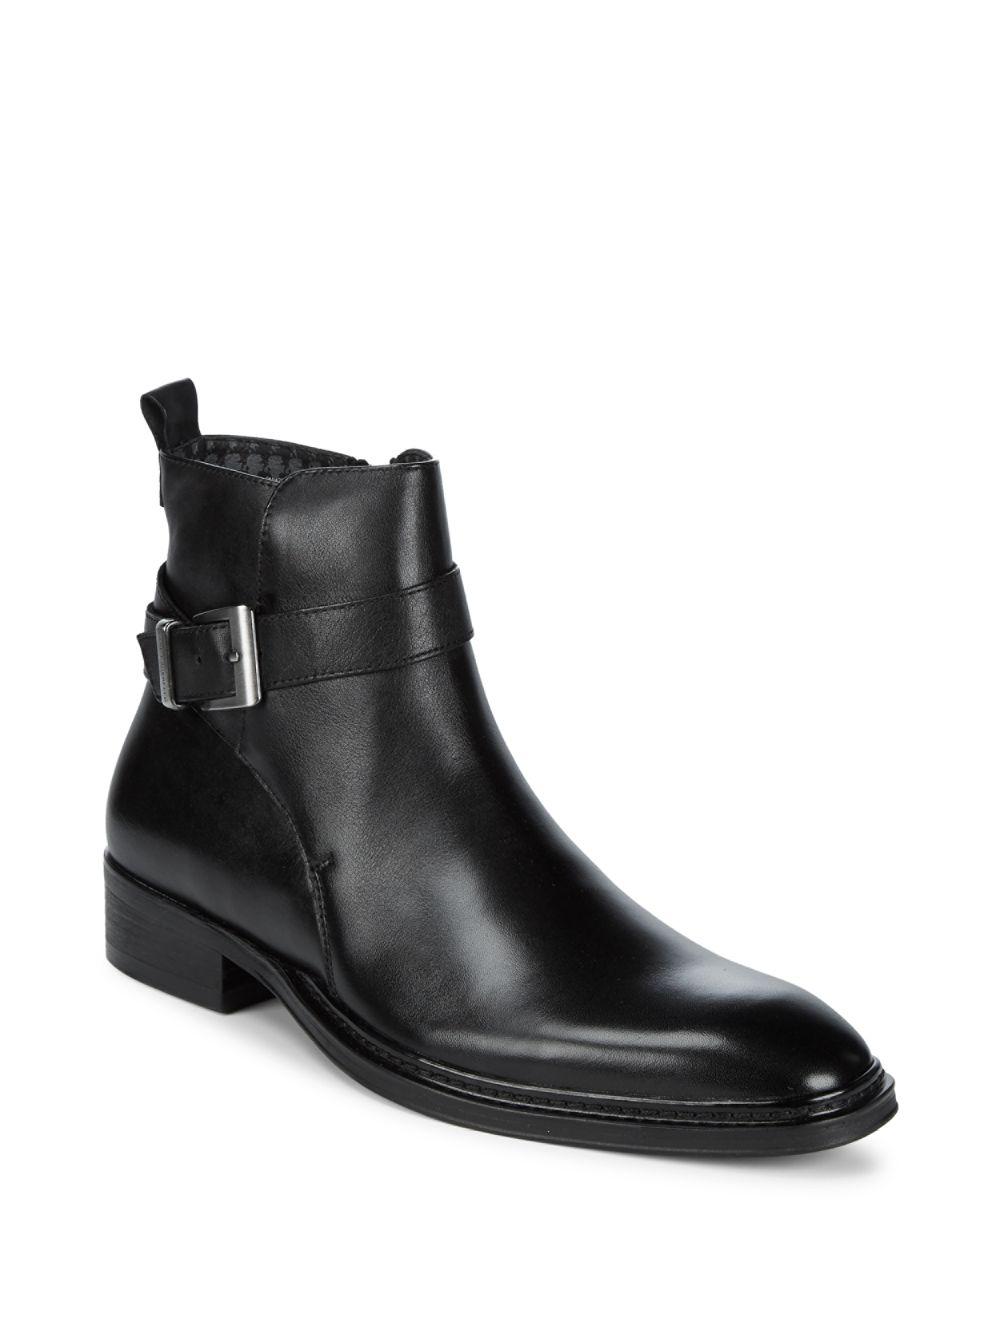 Lyst - Karl Lagerfeld Chelsea Leather Boots in Black for Men